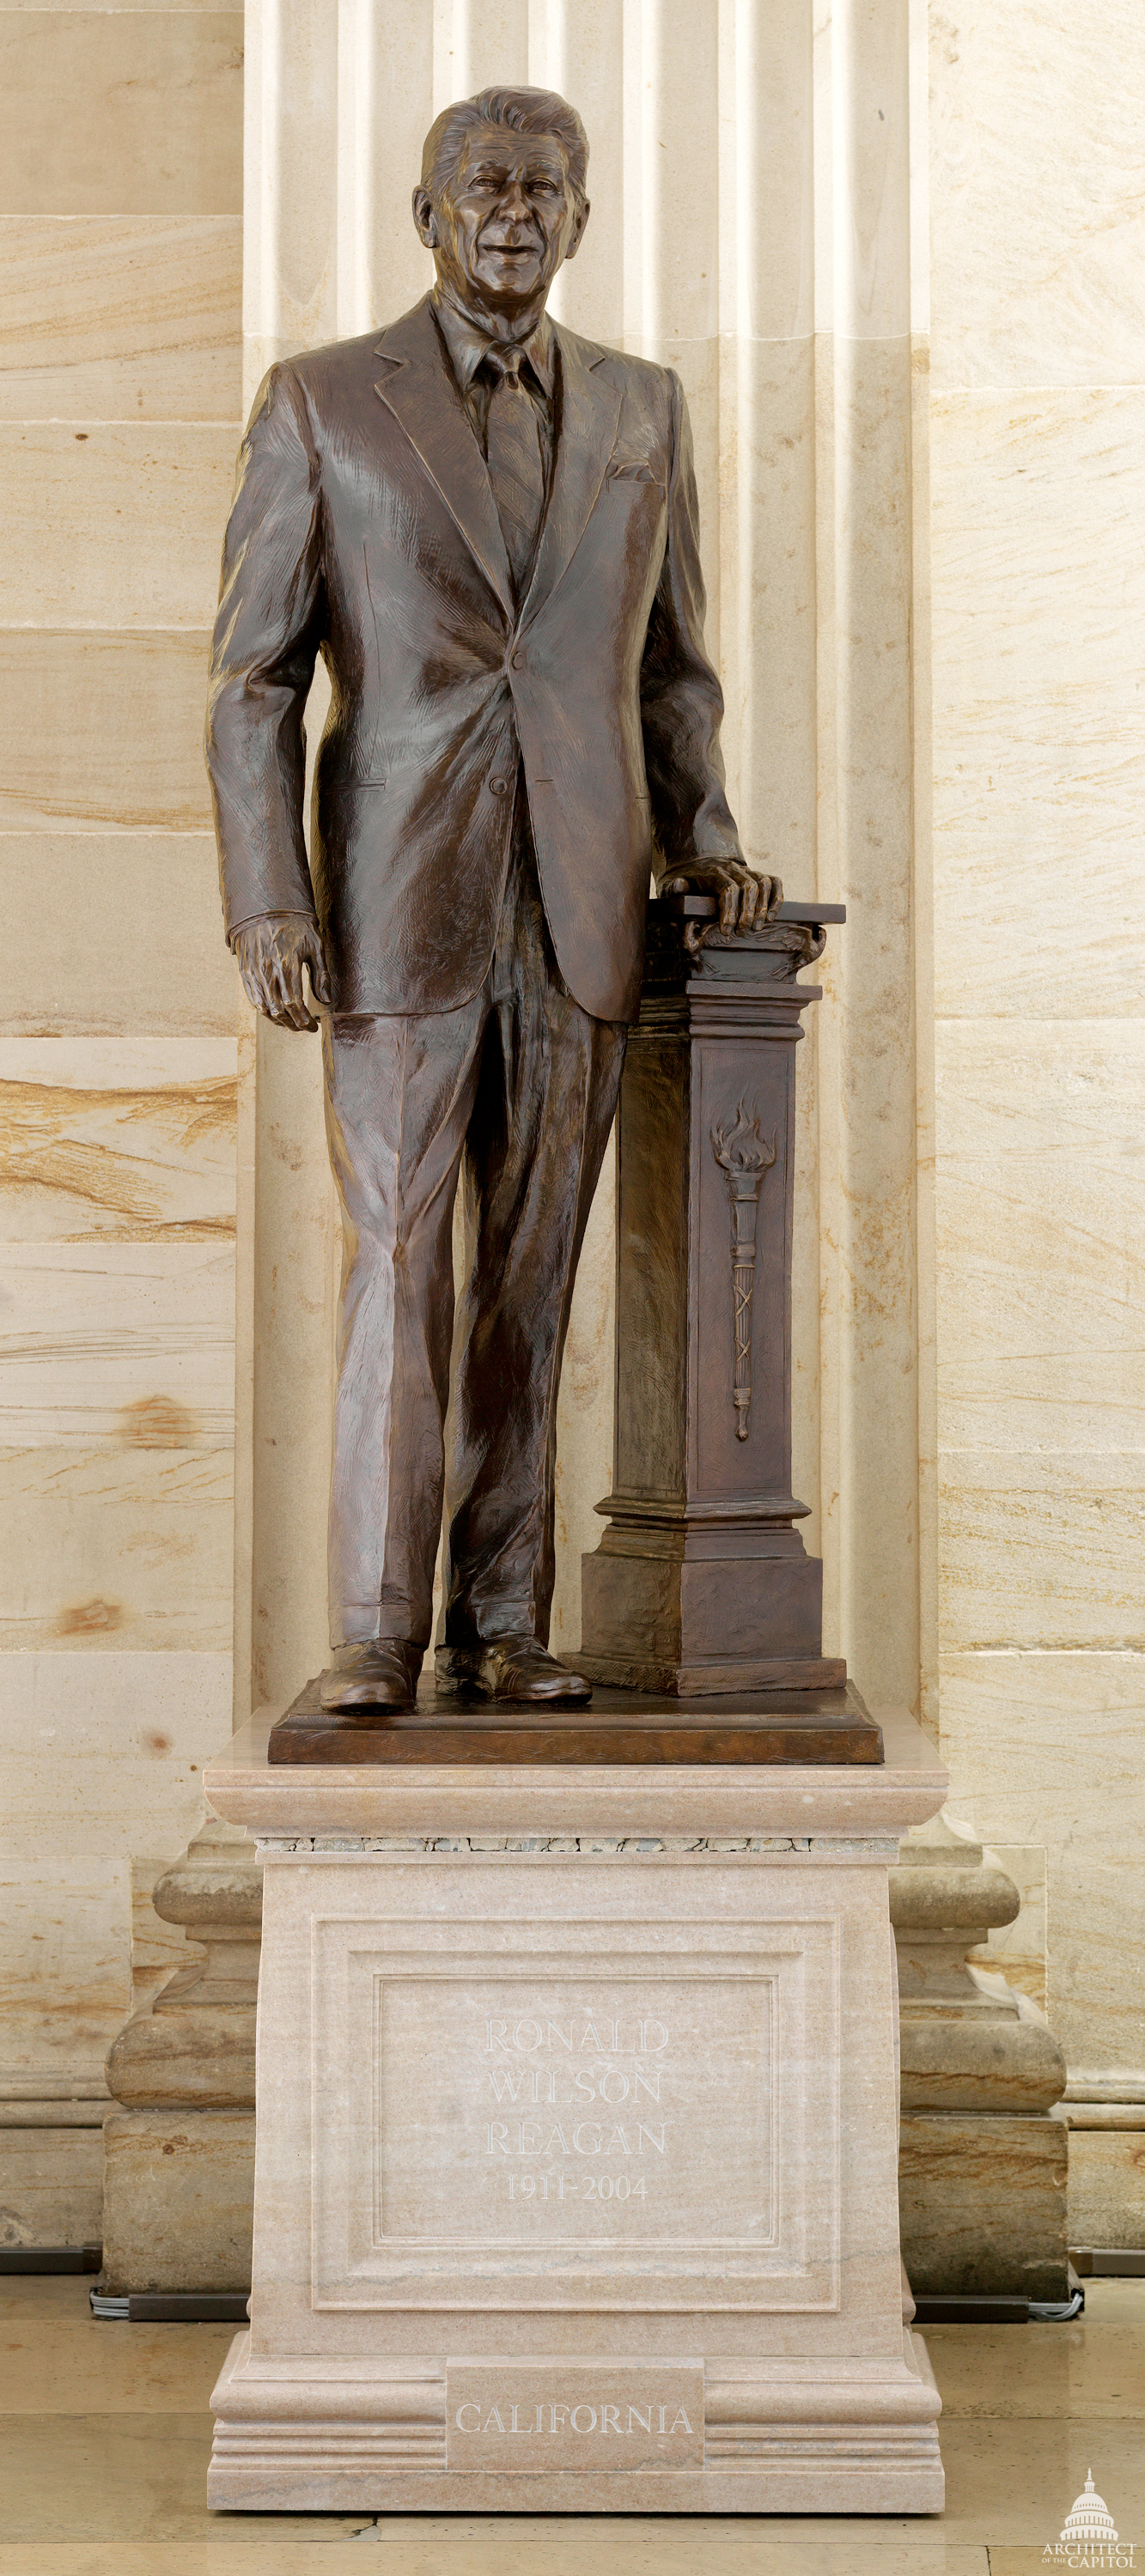 Ronald Wilson Reagan | Architect of the Capitol | United States Capitol